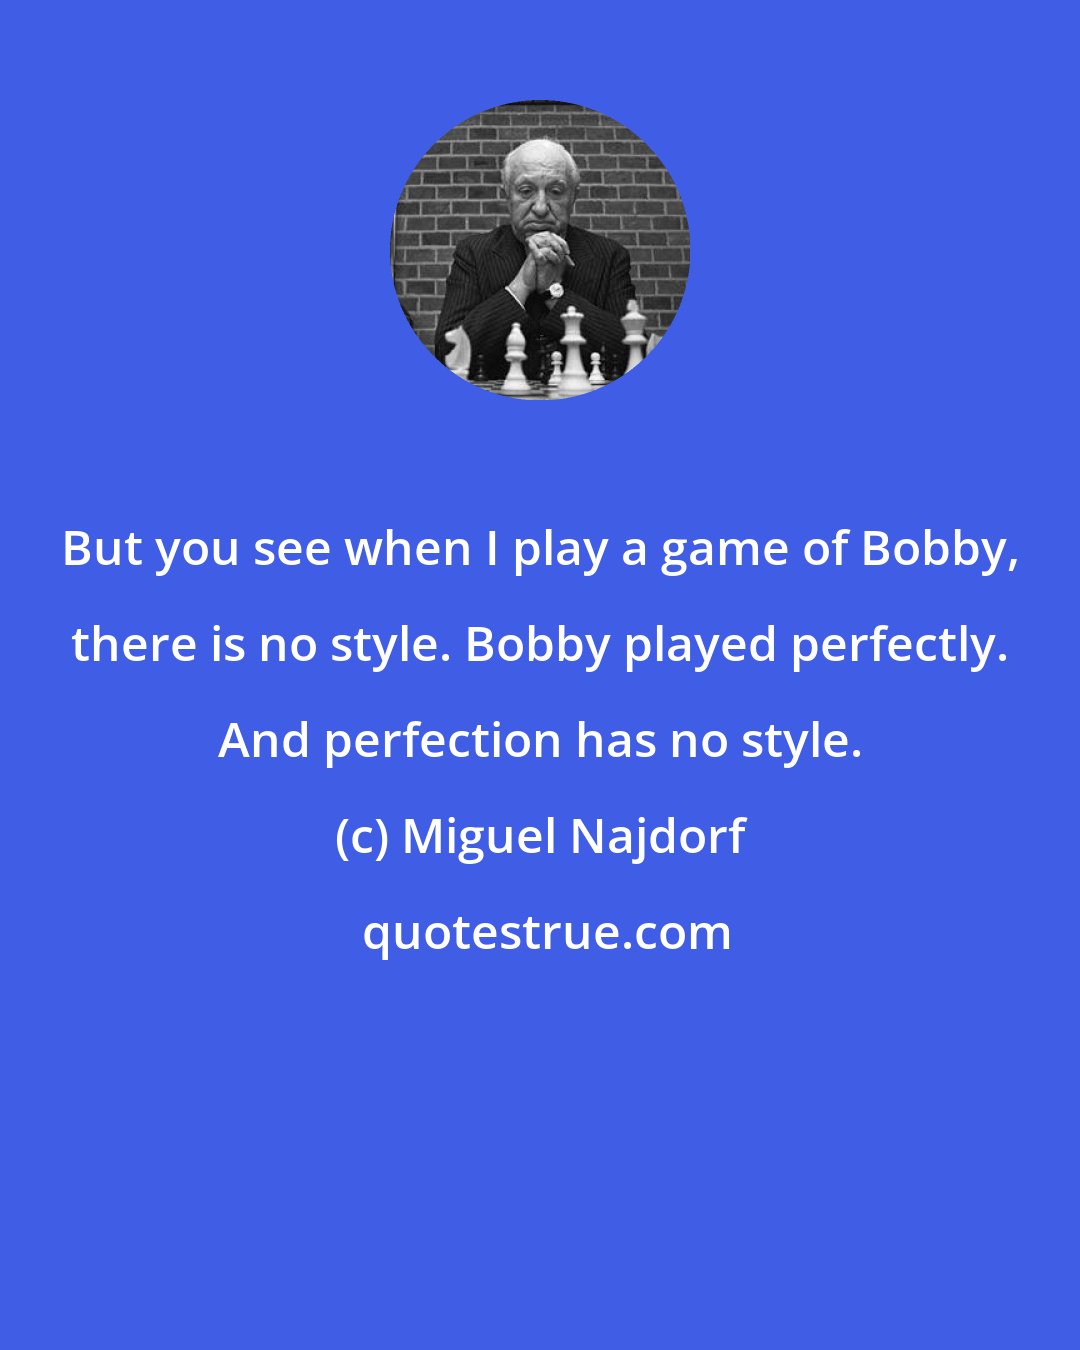 Miguel Najdorf: But you see when I play a game of Bobby, there is no style. Bobby played perfectly. And perfection has no style.